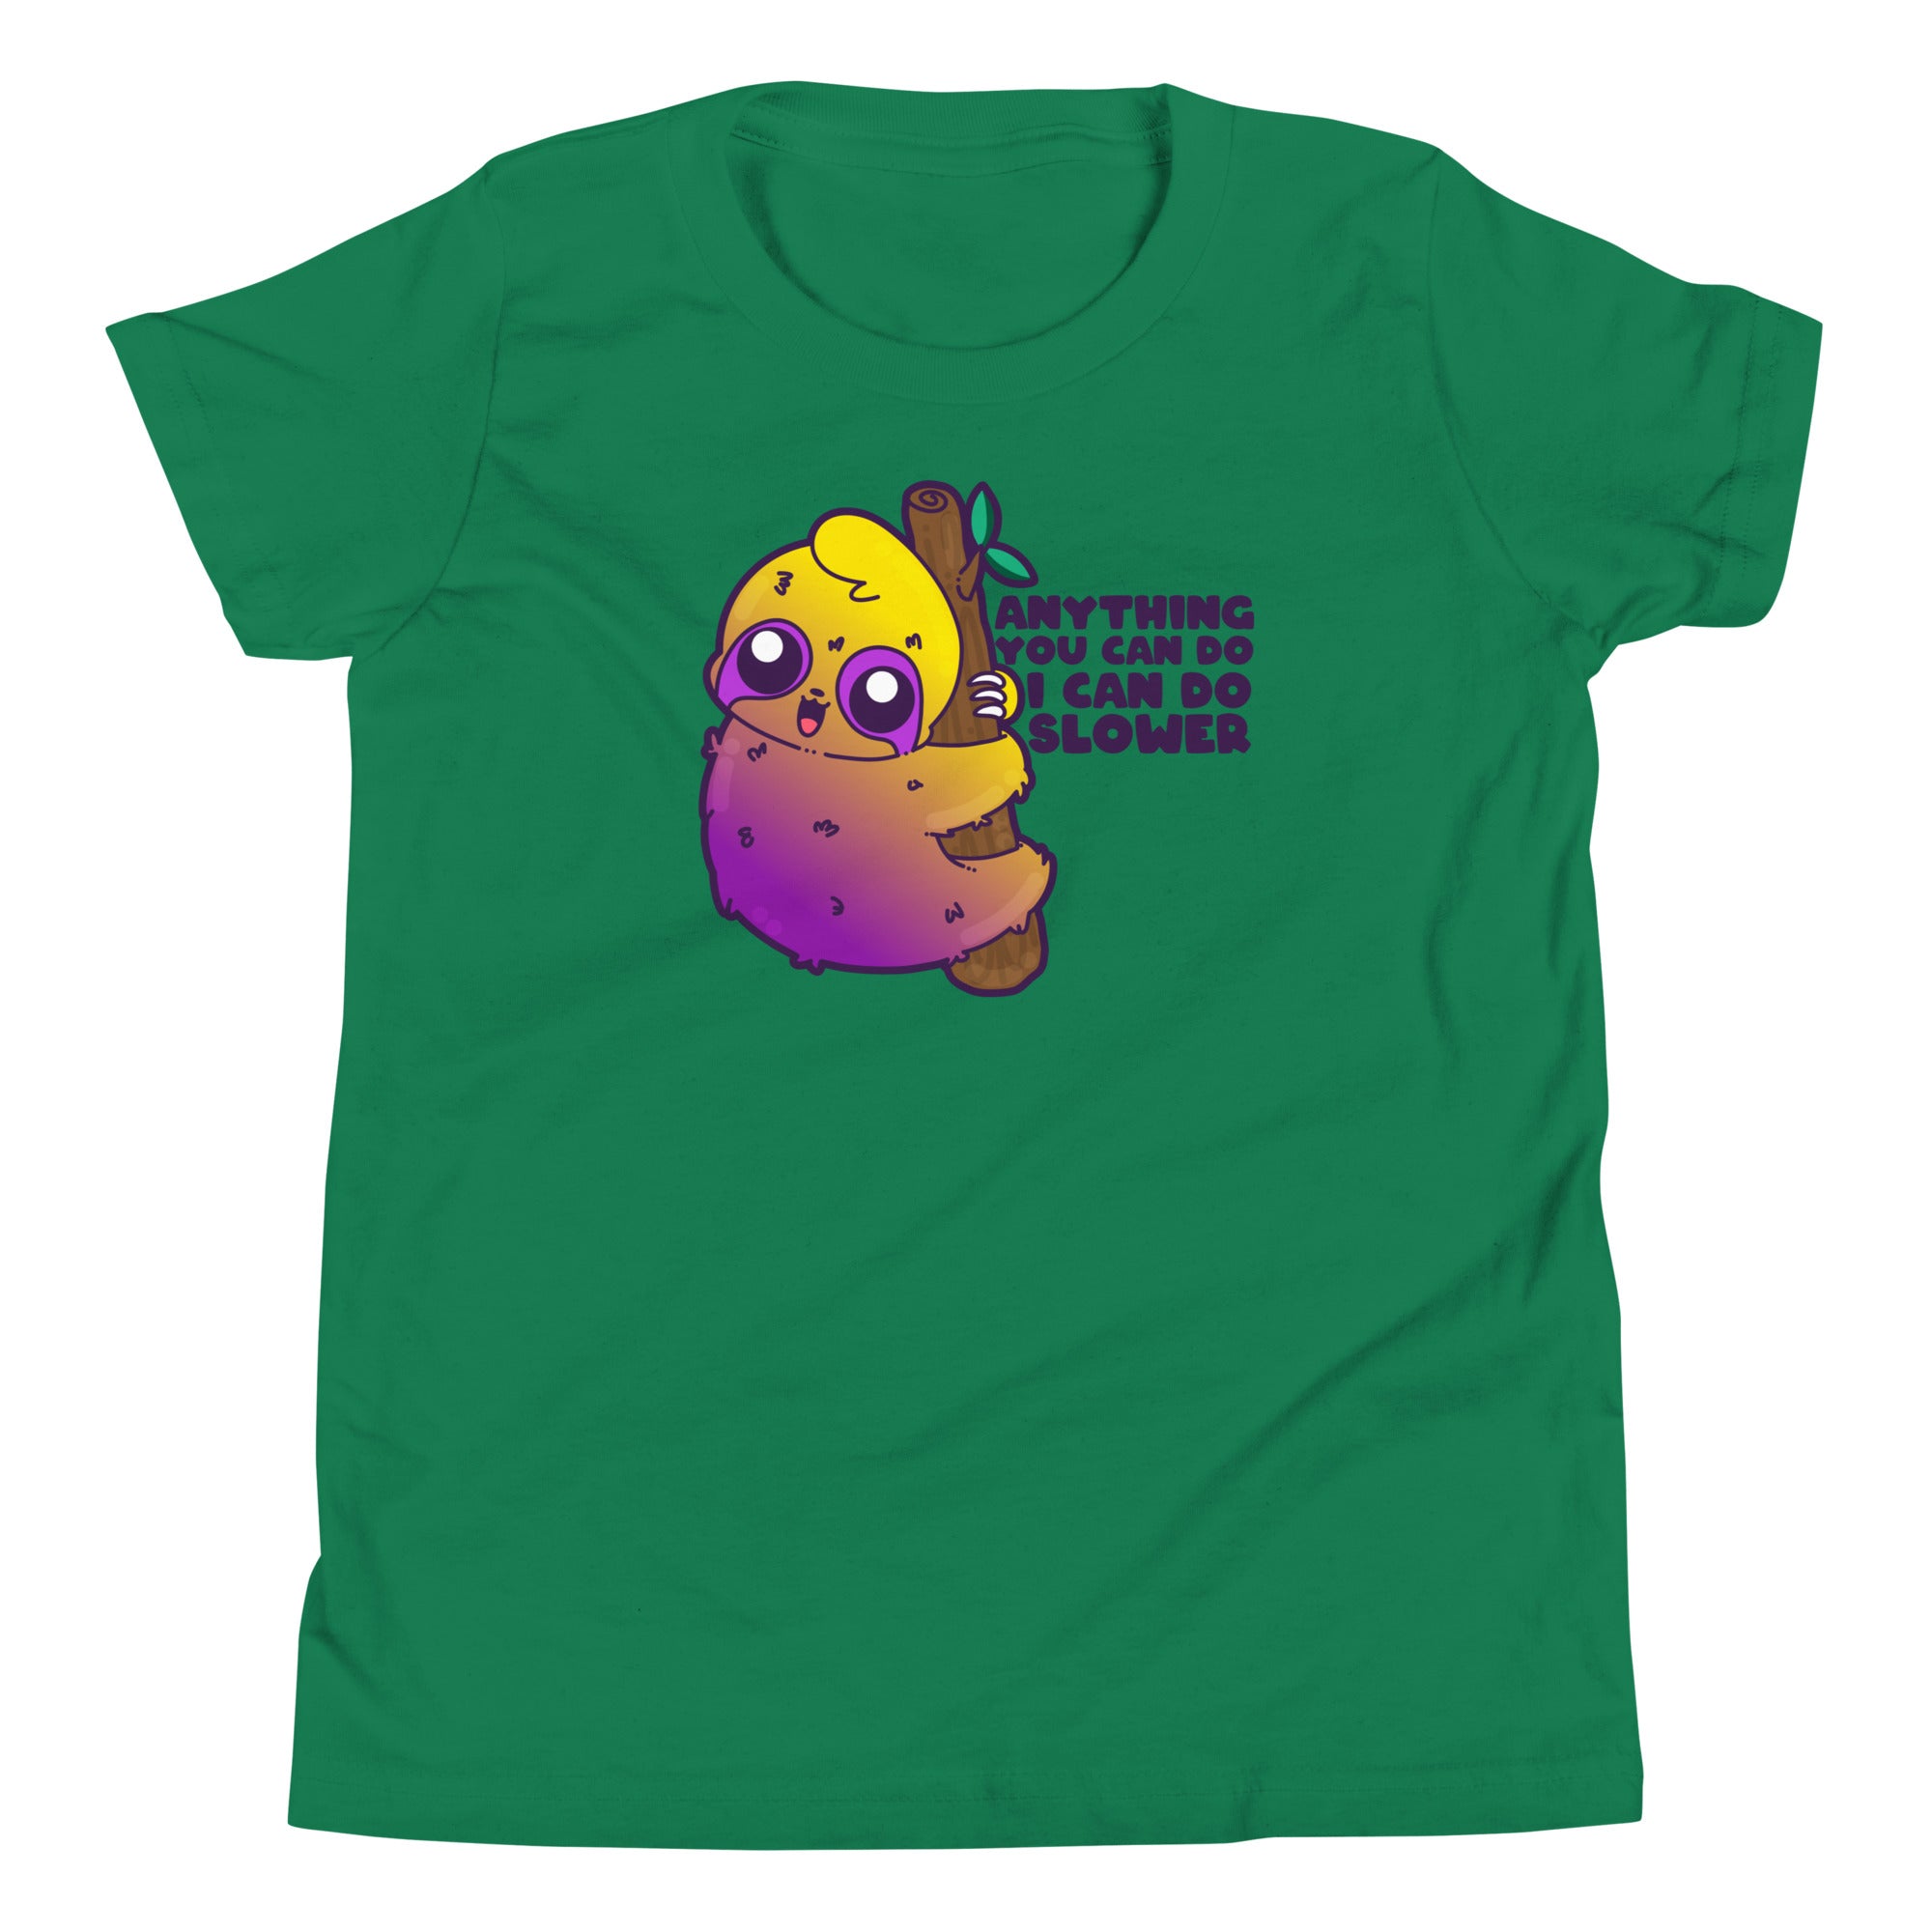 ANYTHING YOU CAN DO I CAN DO BETTER - Kids Tee - ChubbleGumLLC